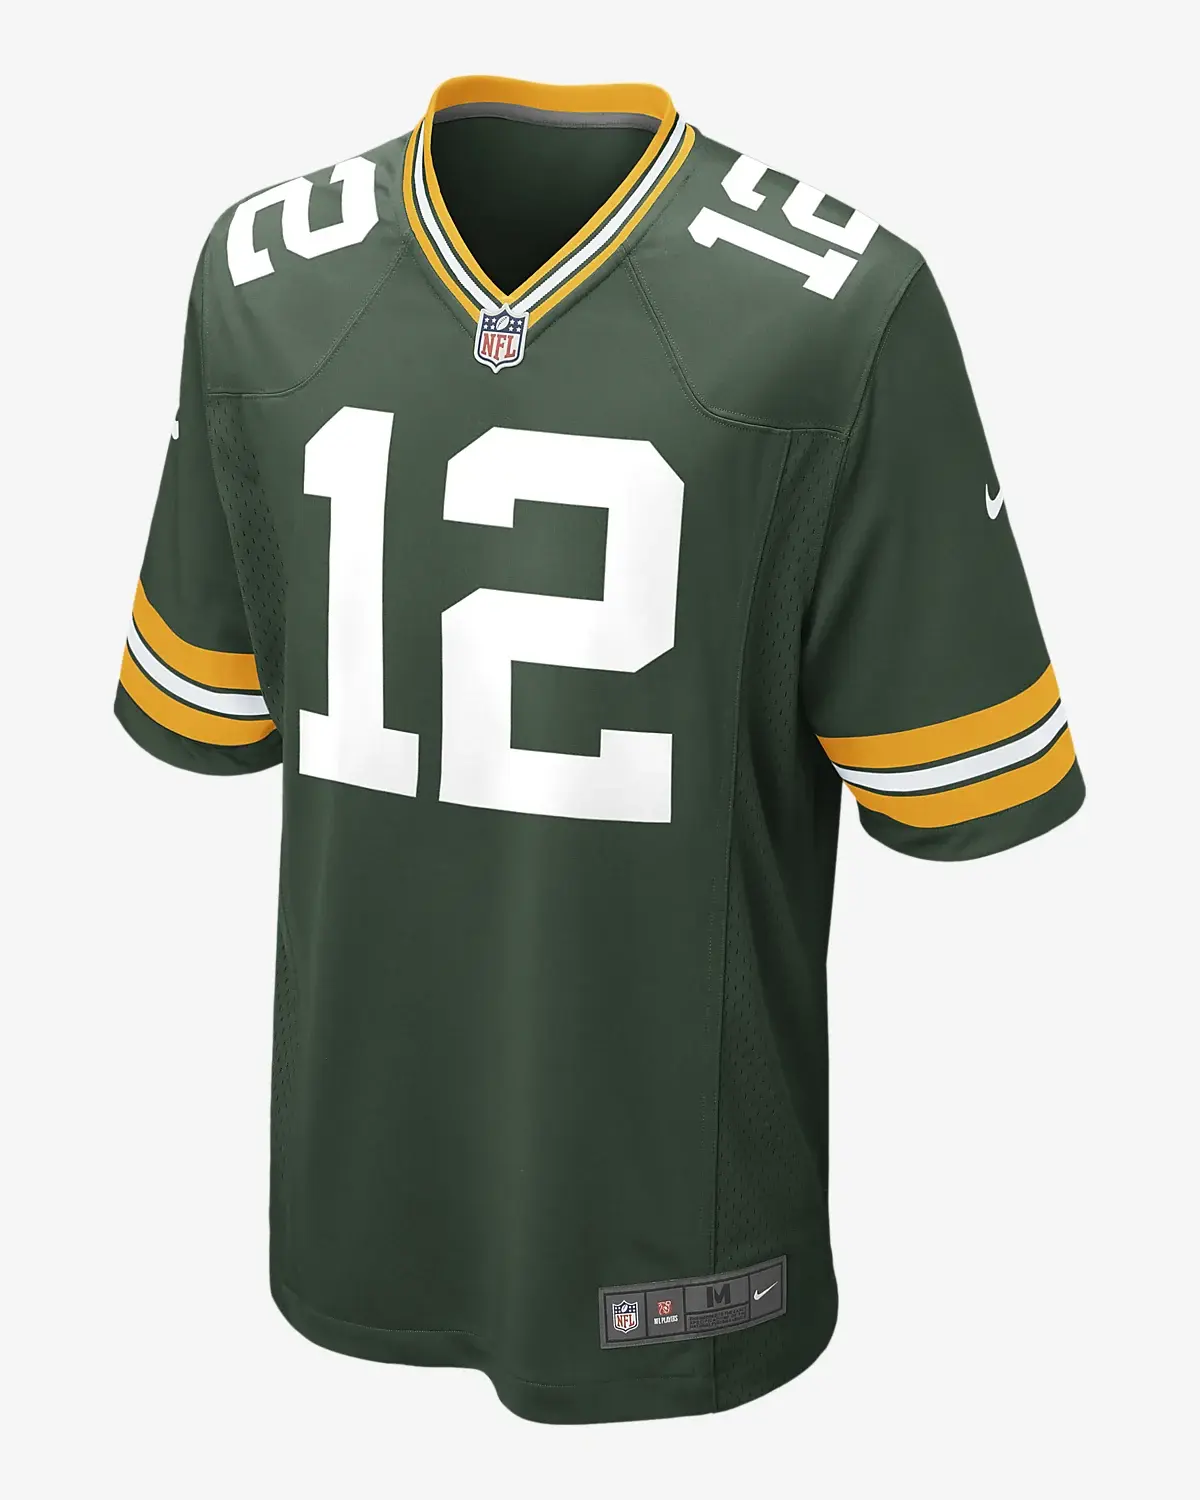 Nike NFL Green Bay Packers (Aaron Rodgers). 1